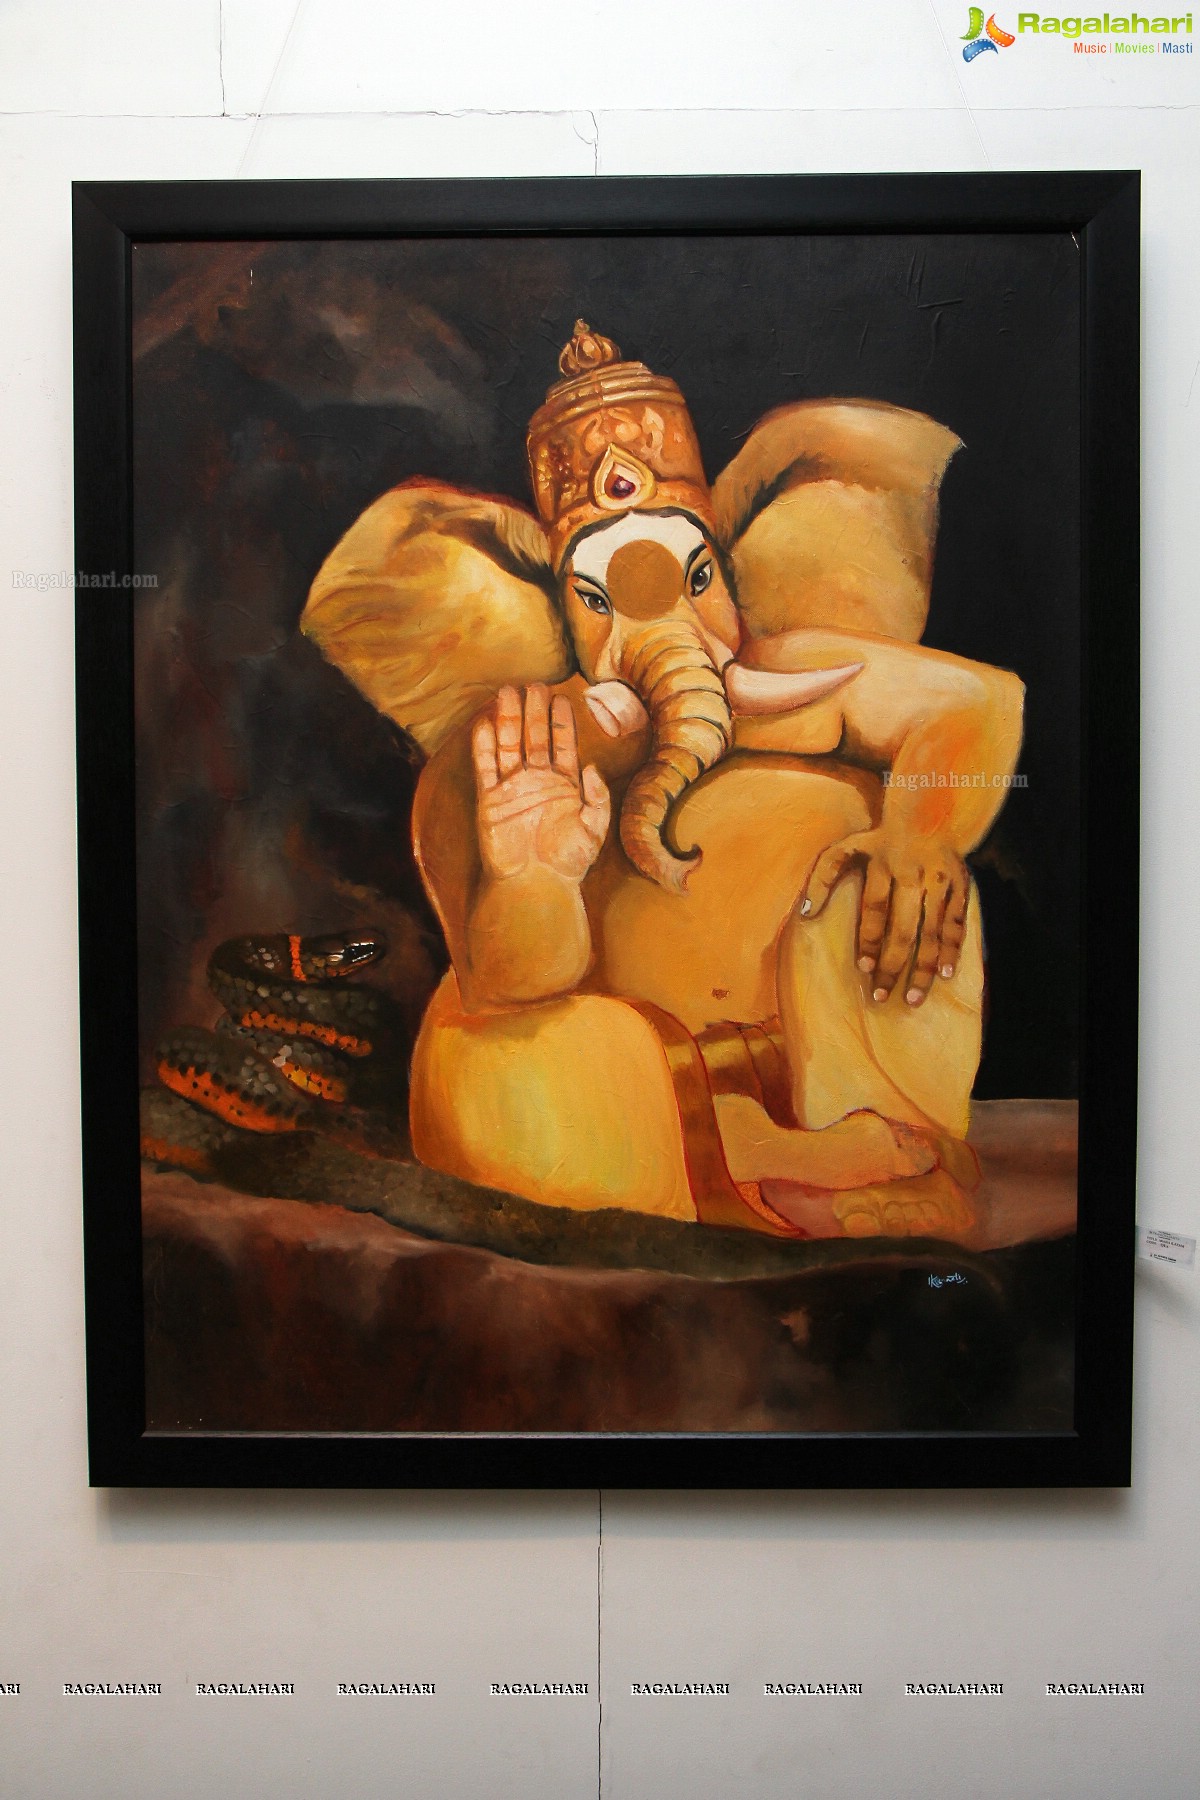 Paanchajanya, Invoking Applause - A Solo Art Exhibition by K.K Tenneti